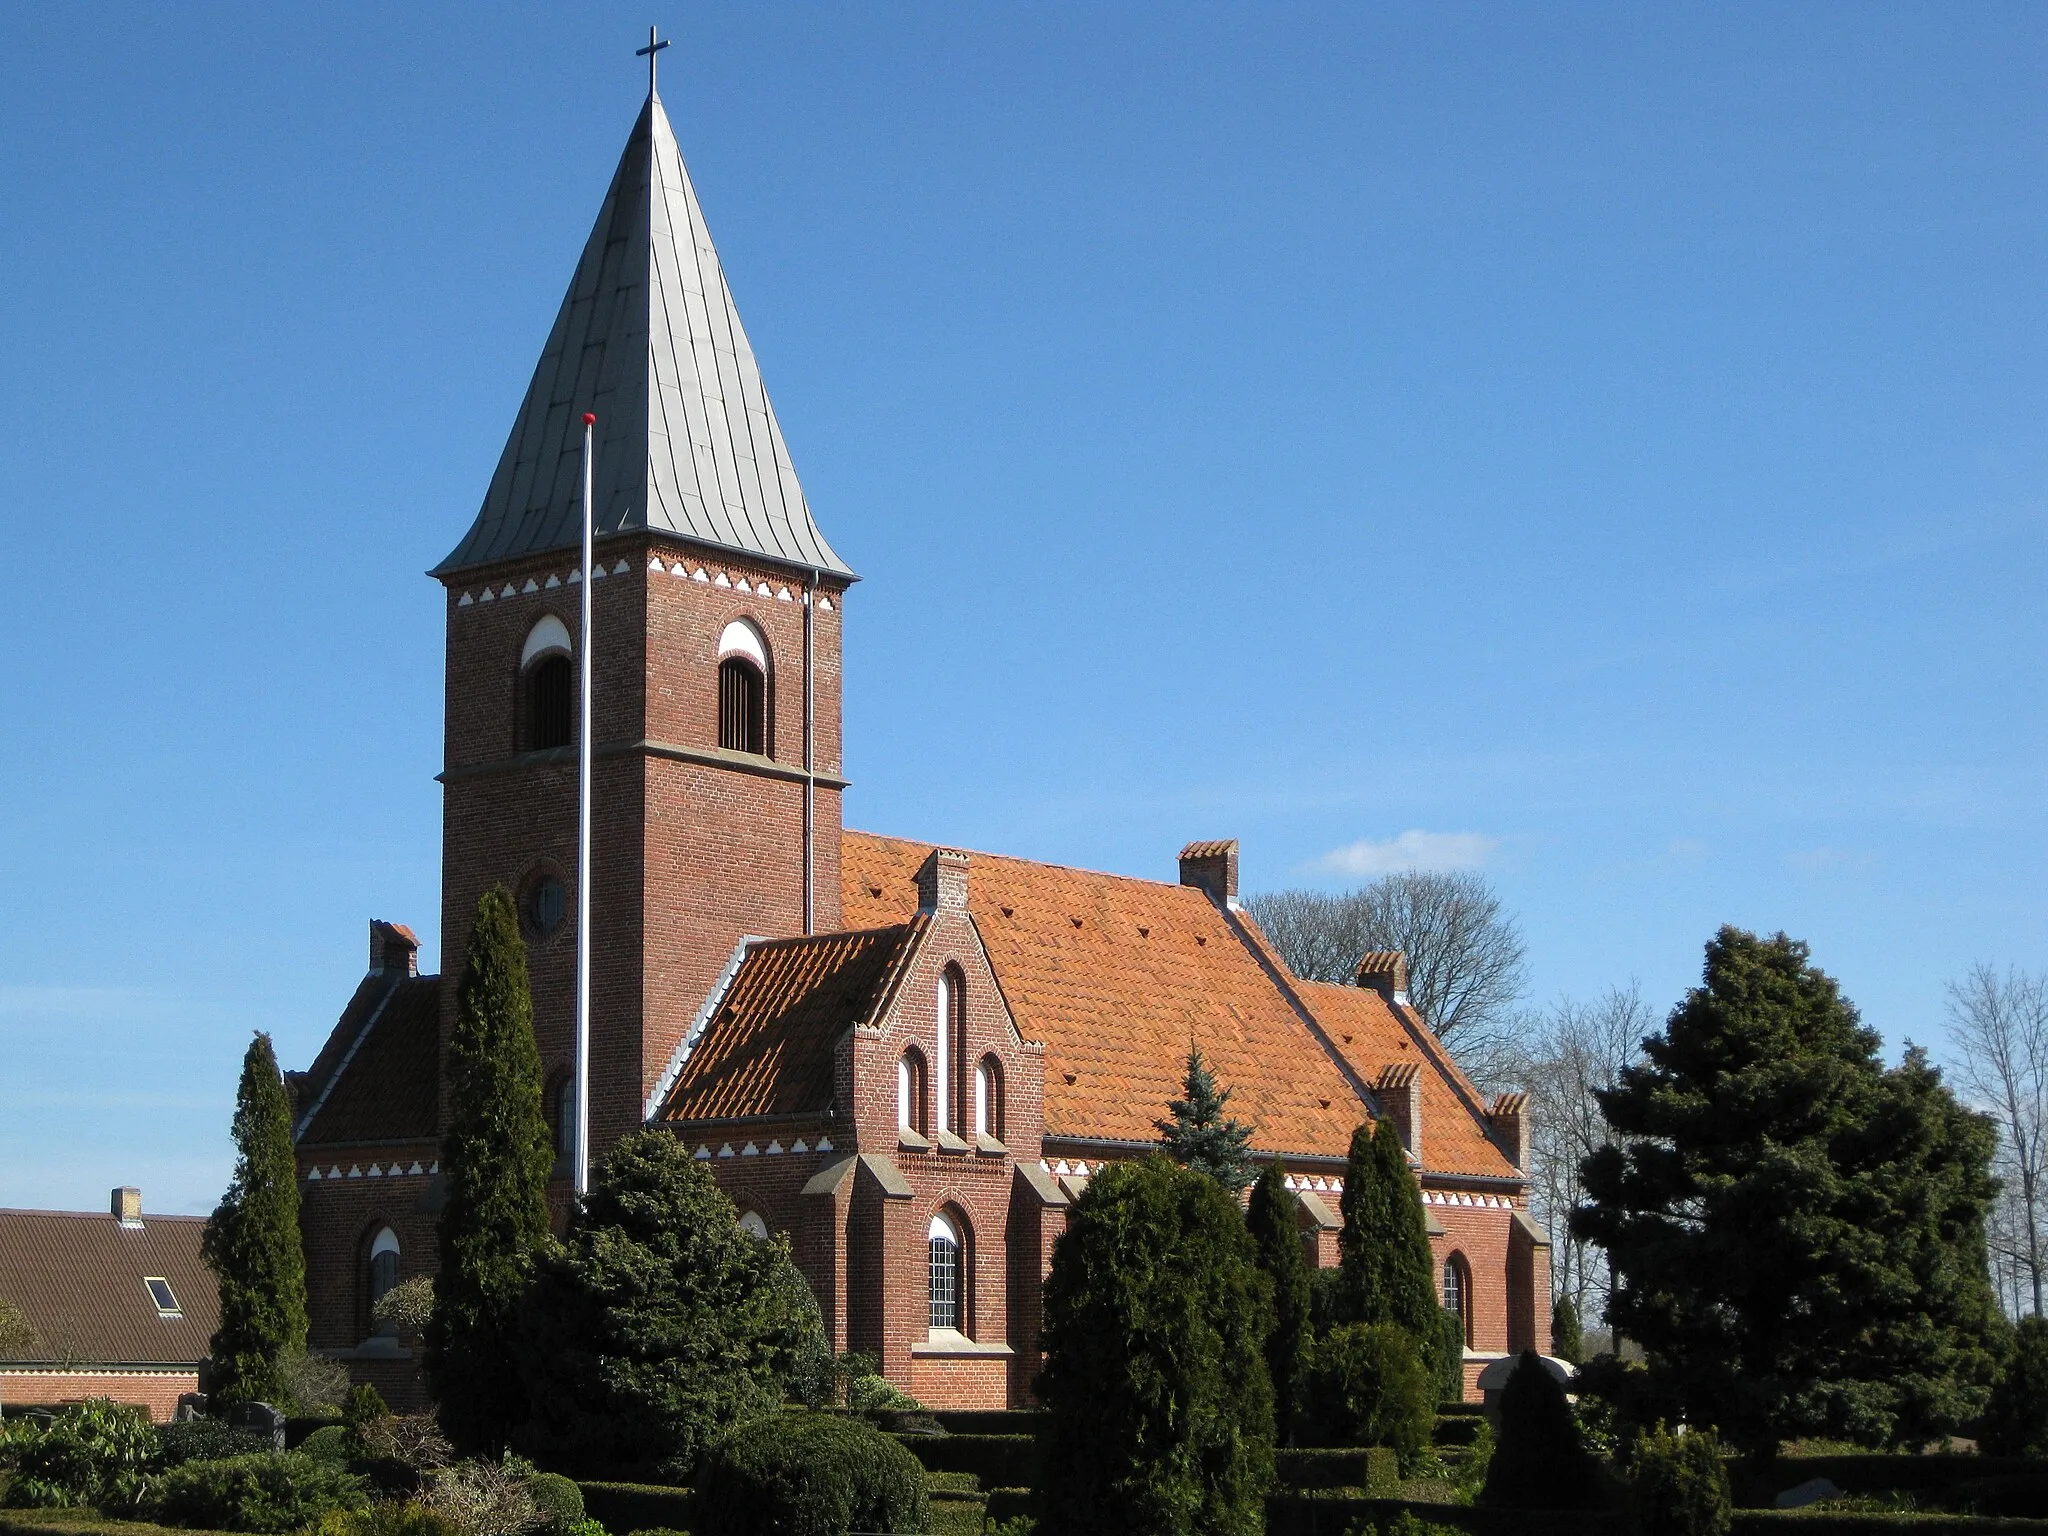 Photo showing: The church "Hjallerup Kirke" nearby the small town "Hjallerup". The church is located in North Jutland, Denmark.